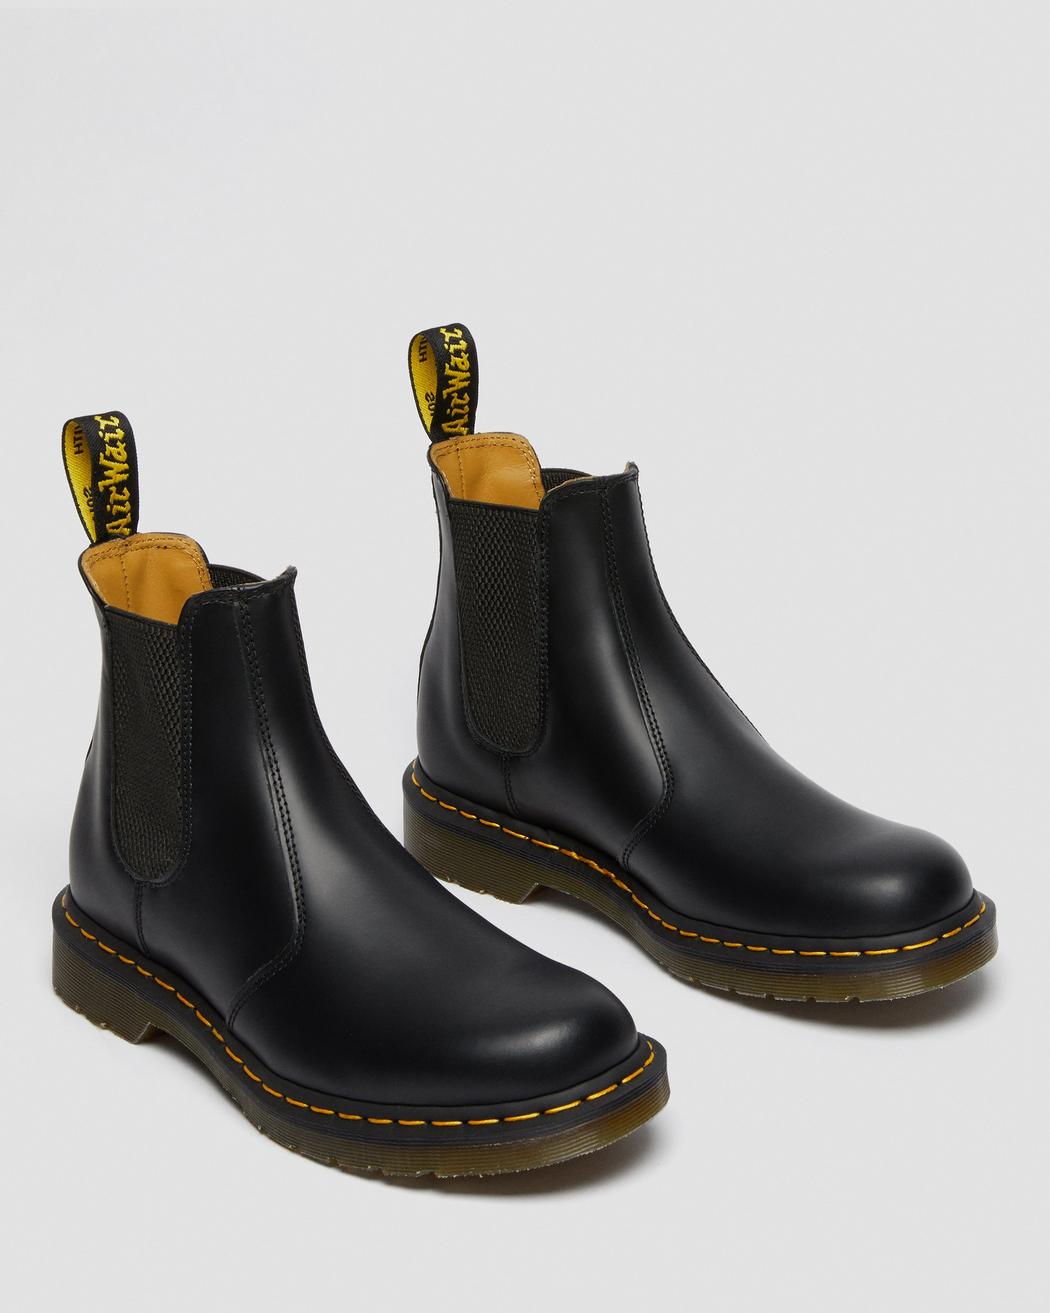 2976 Yellow Stitch Smooth Leather Chelsea Boots - Black Vintage